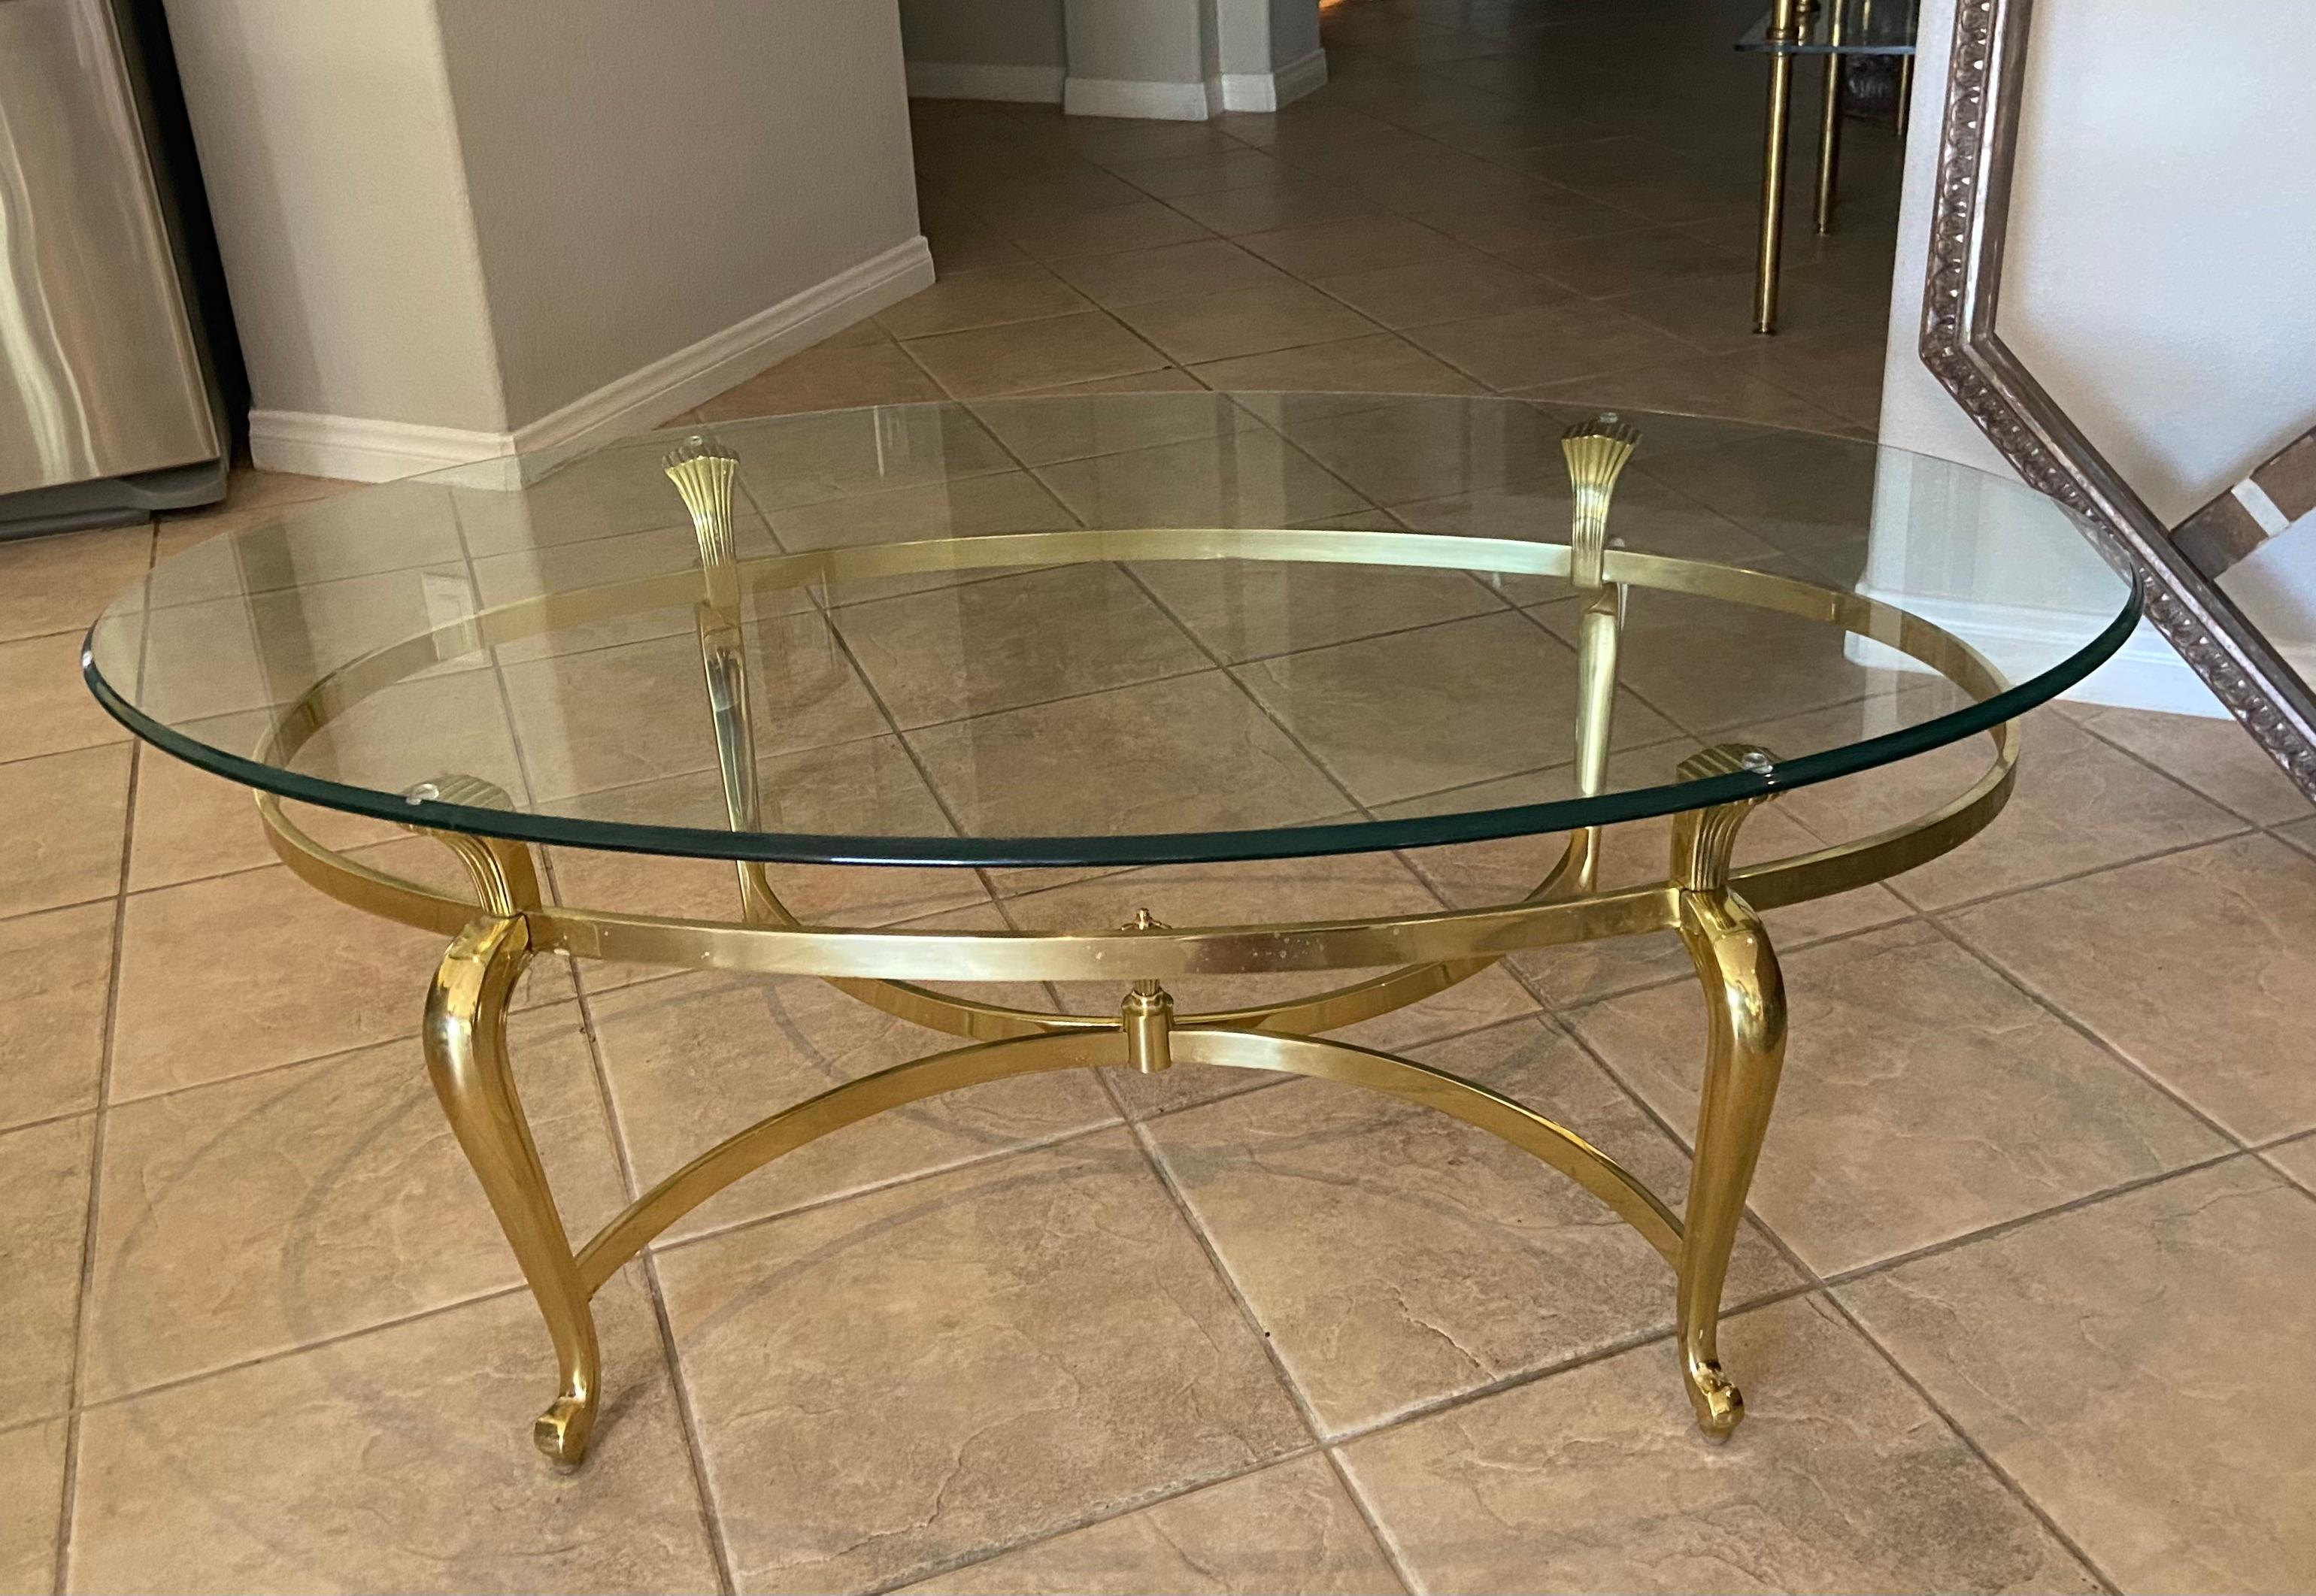 French style brass oval coffee or cocktail. Glass is thick with curved edge, frame is made of real brass (not plated) and is well made and nicely detailed. Great addition to both modern and tradition decor.